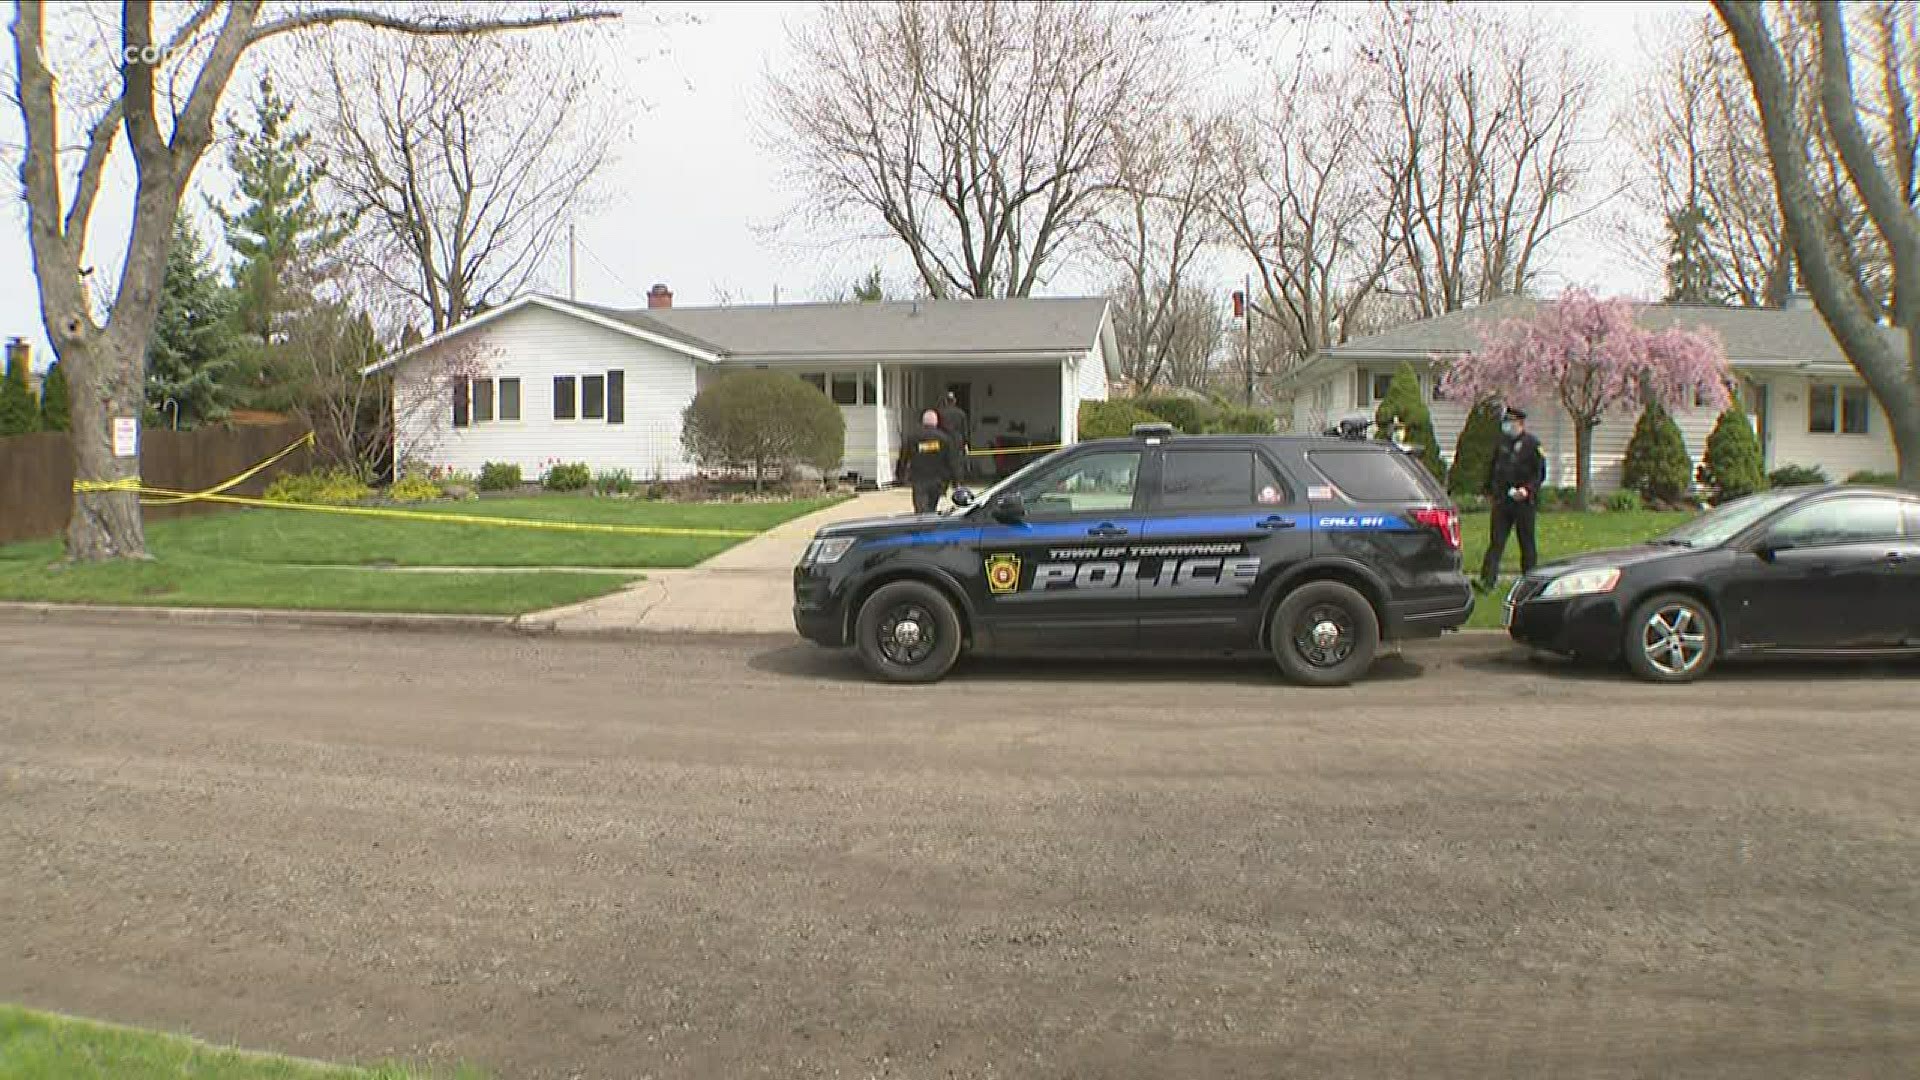 Body found inside home ruled a homicide